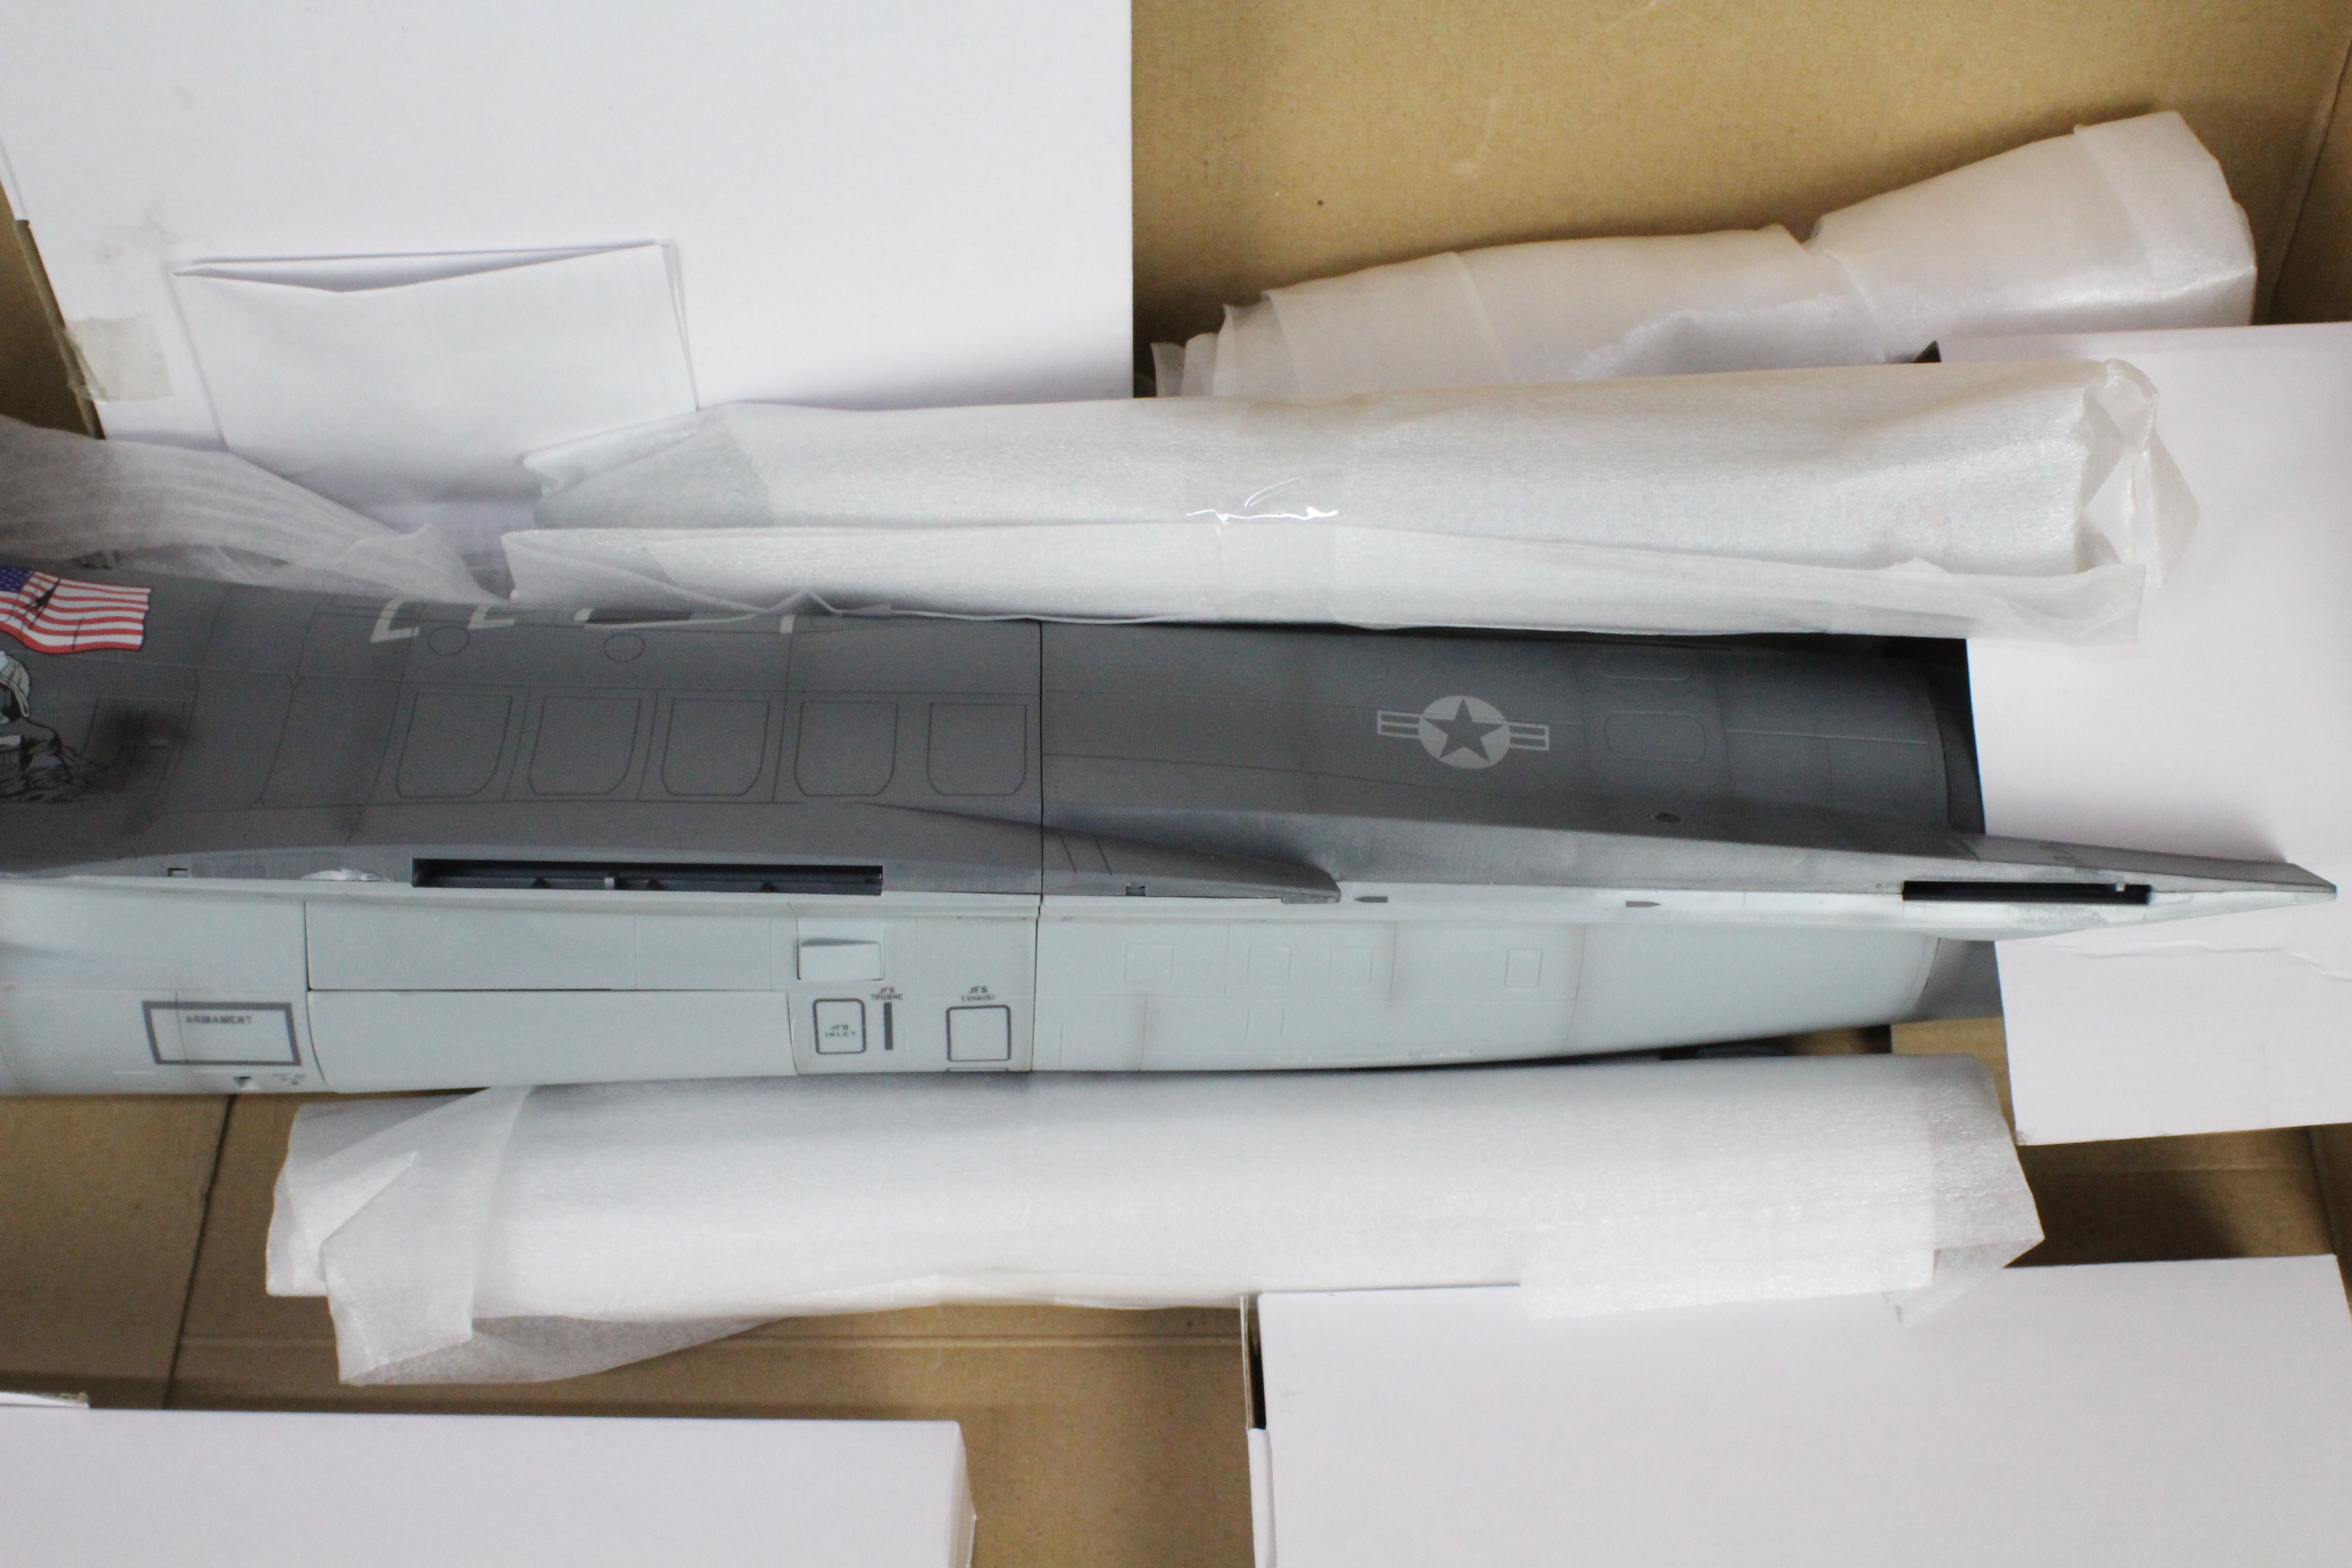 Elite Force - A boxed Limited Edition Elite Force #003770 1:18 scale USAF-16C Fighting Falcon - Image 4 of 6